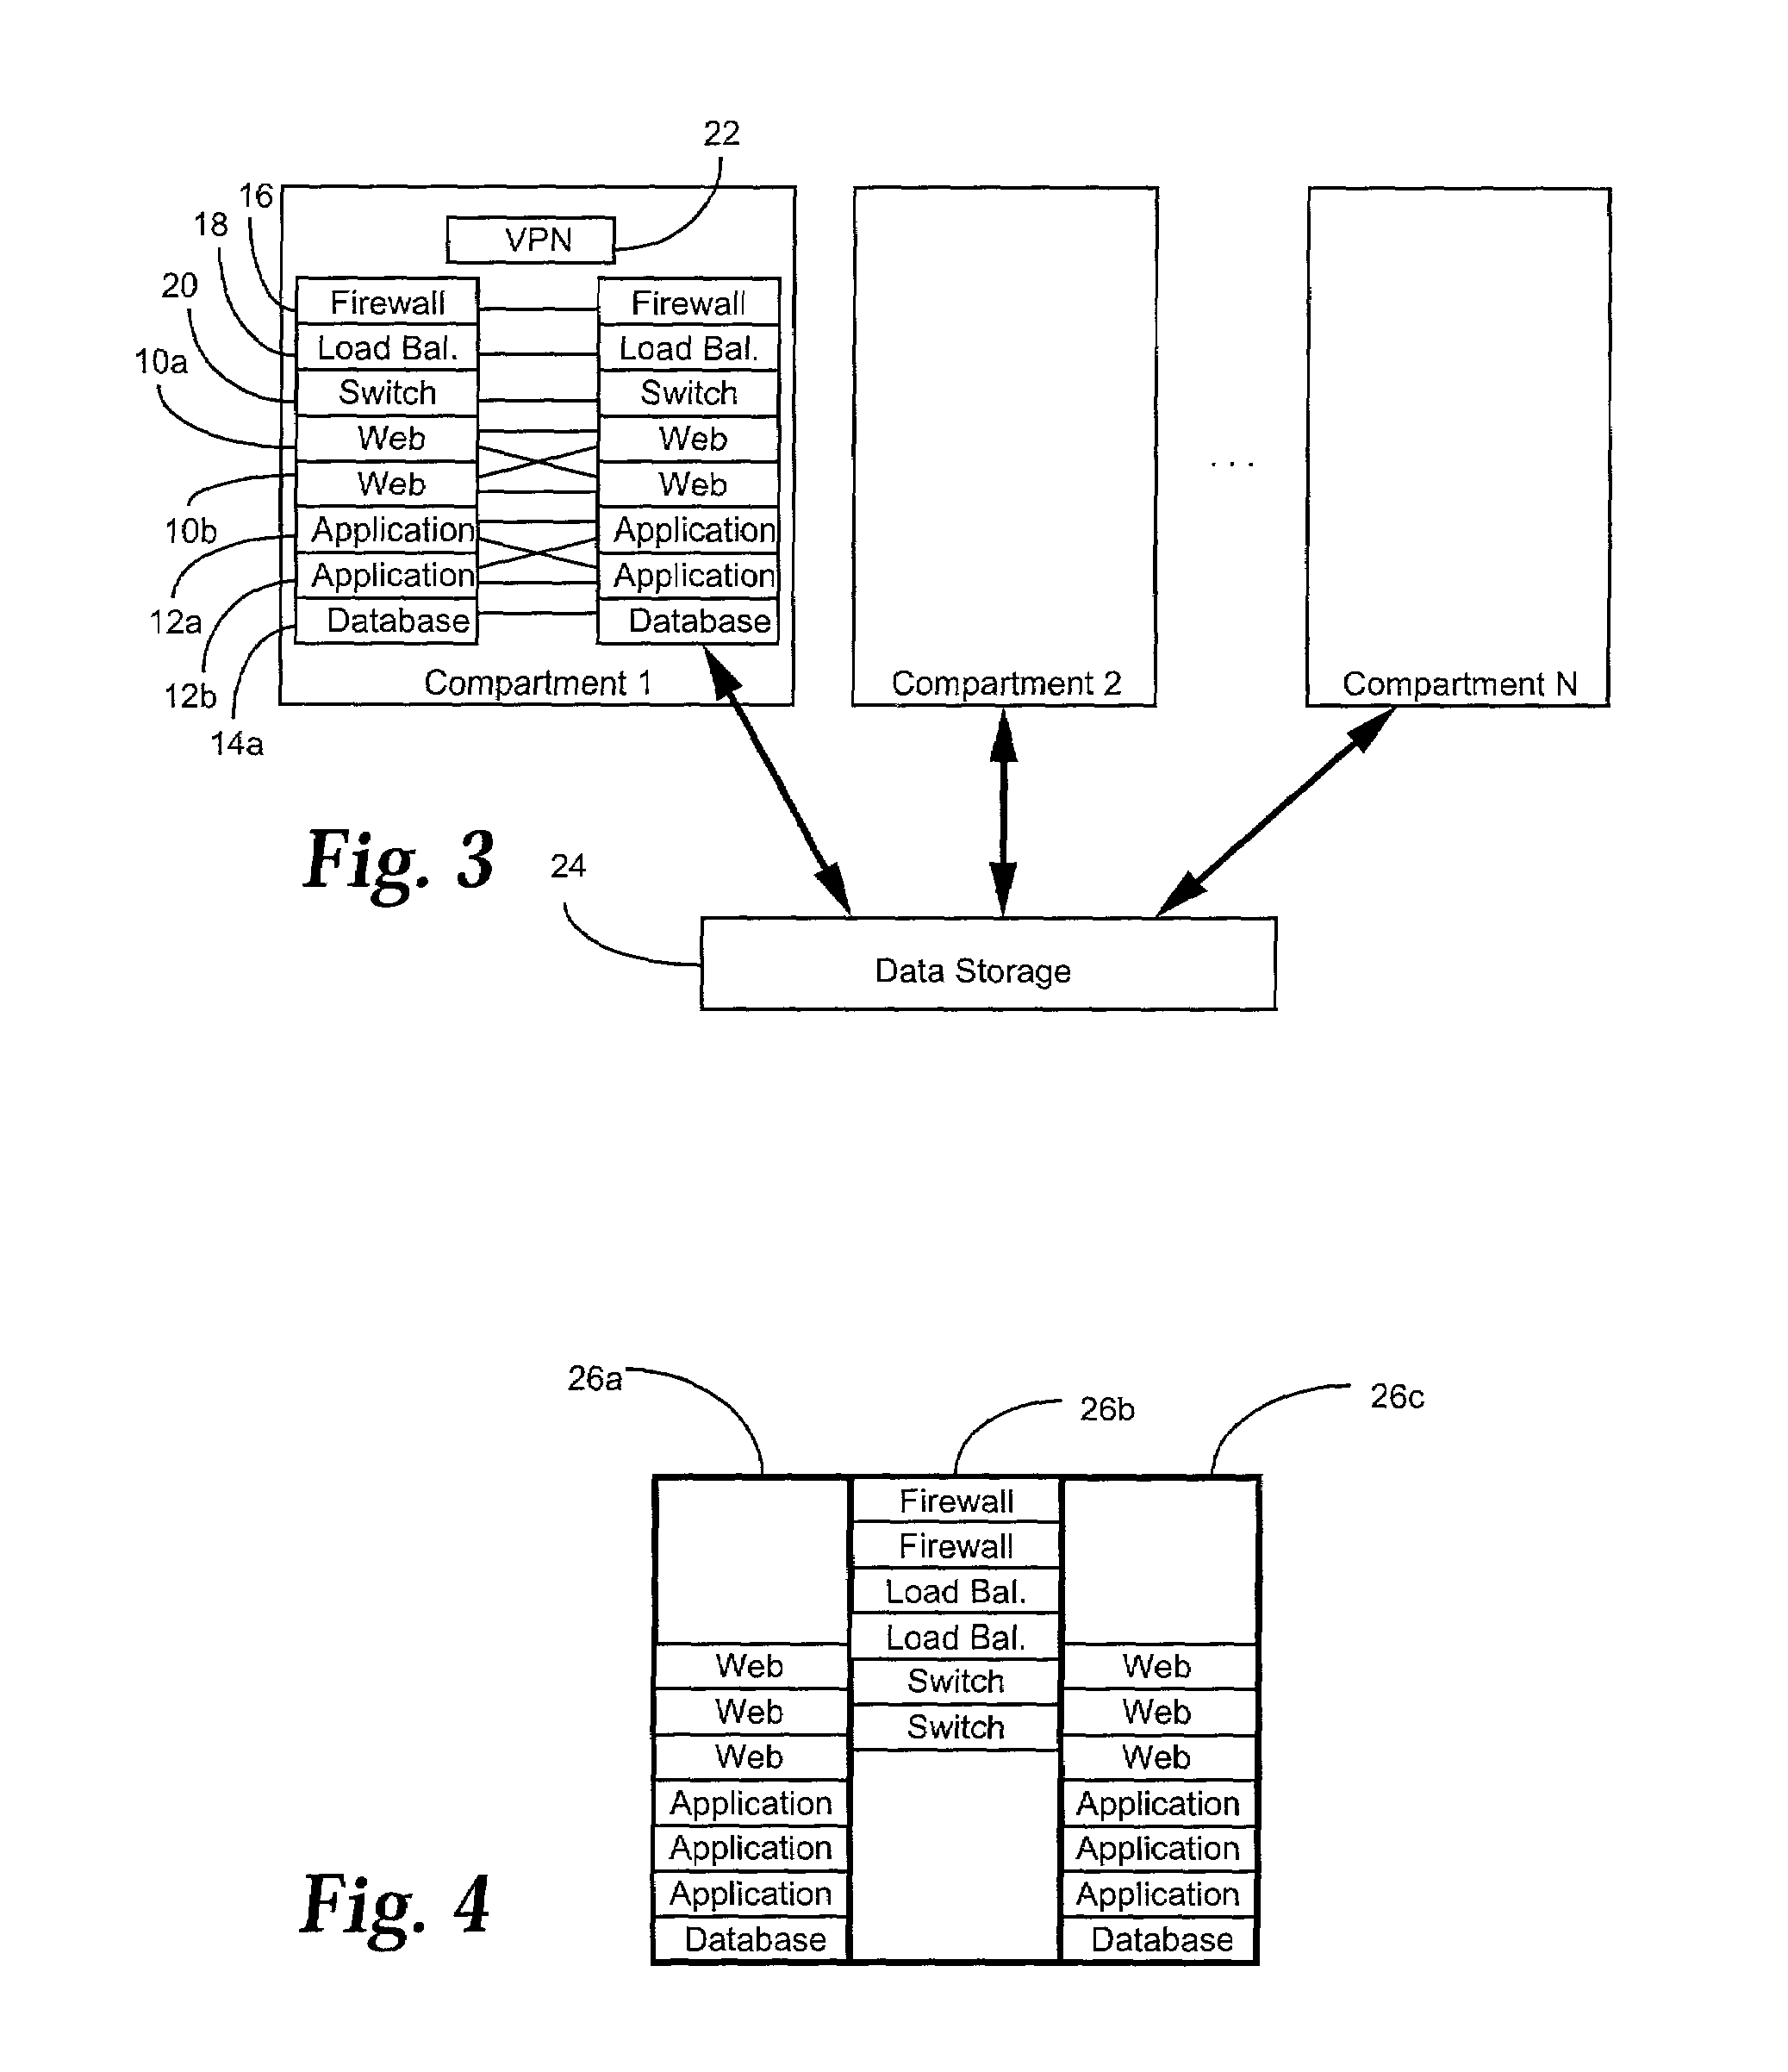 Automated provisioning of computing networks using a network database model